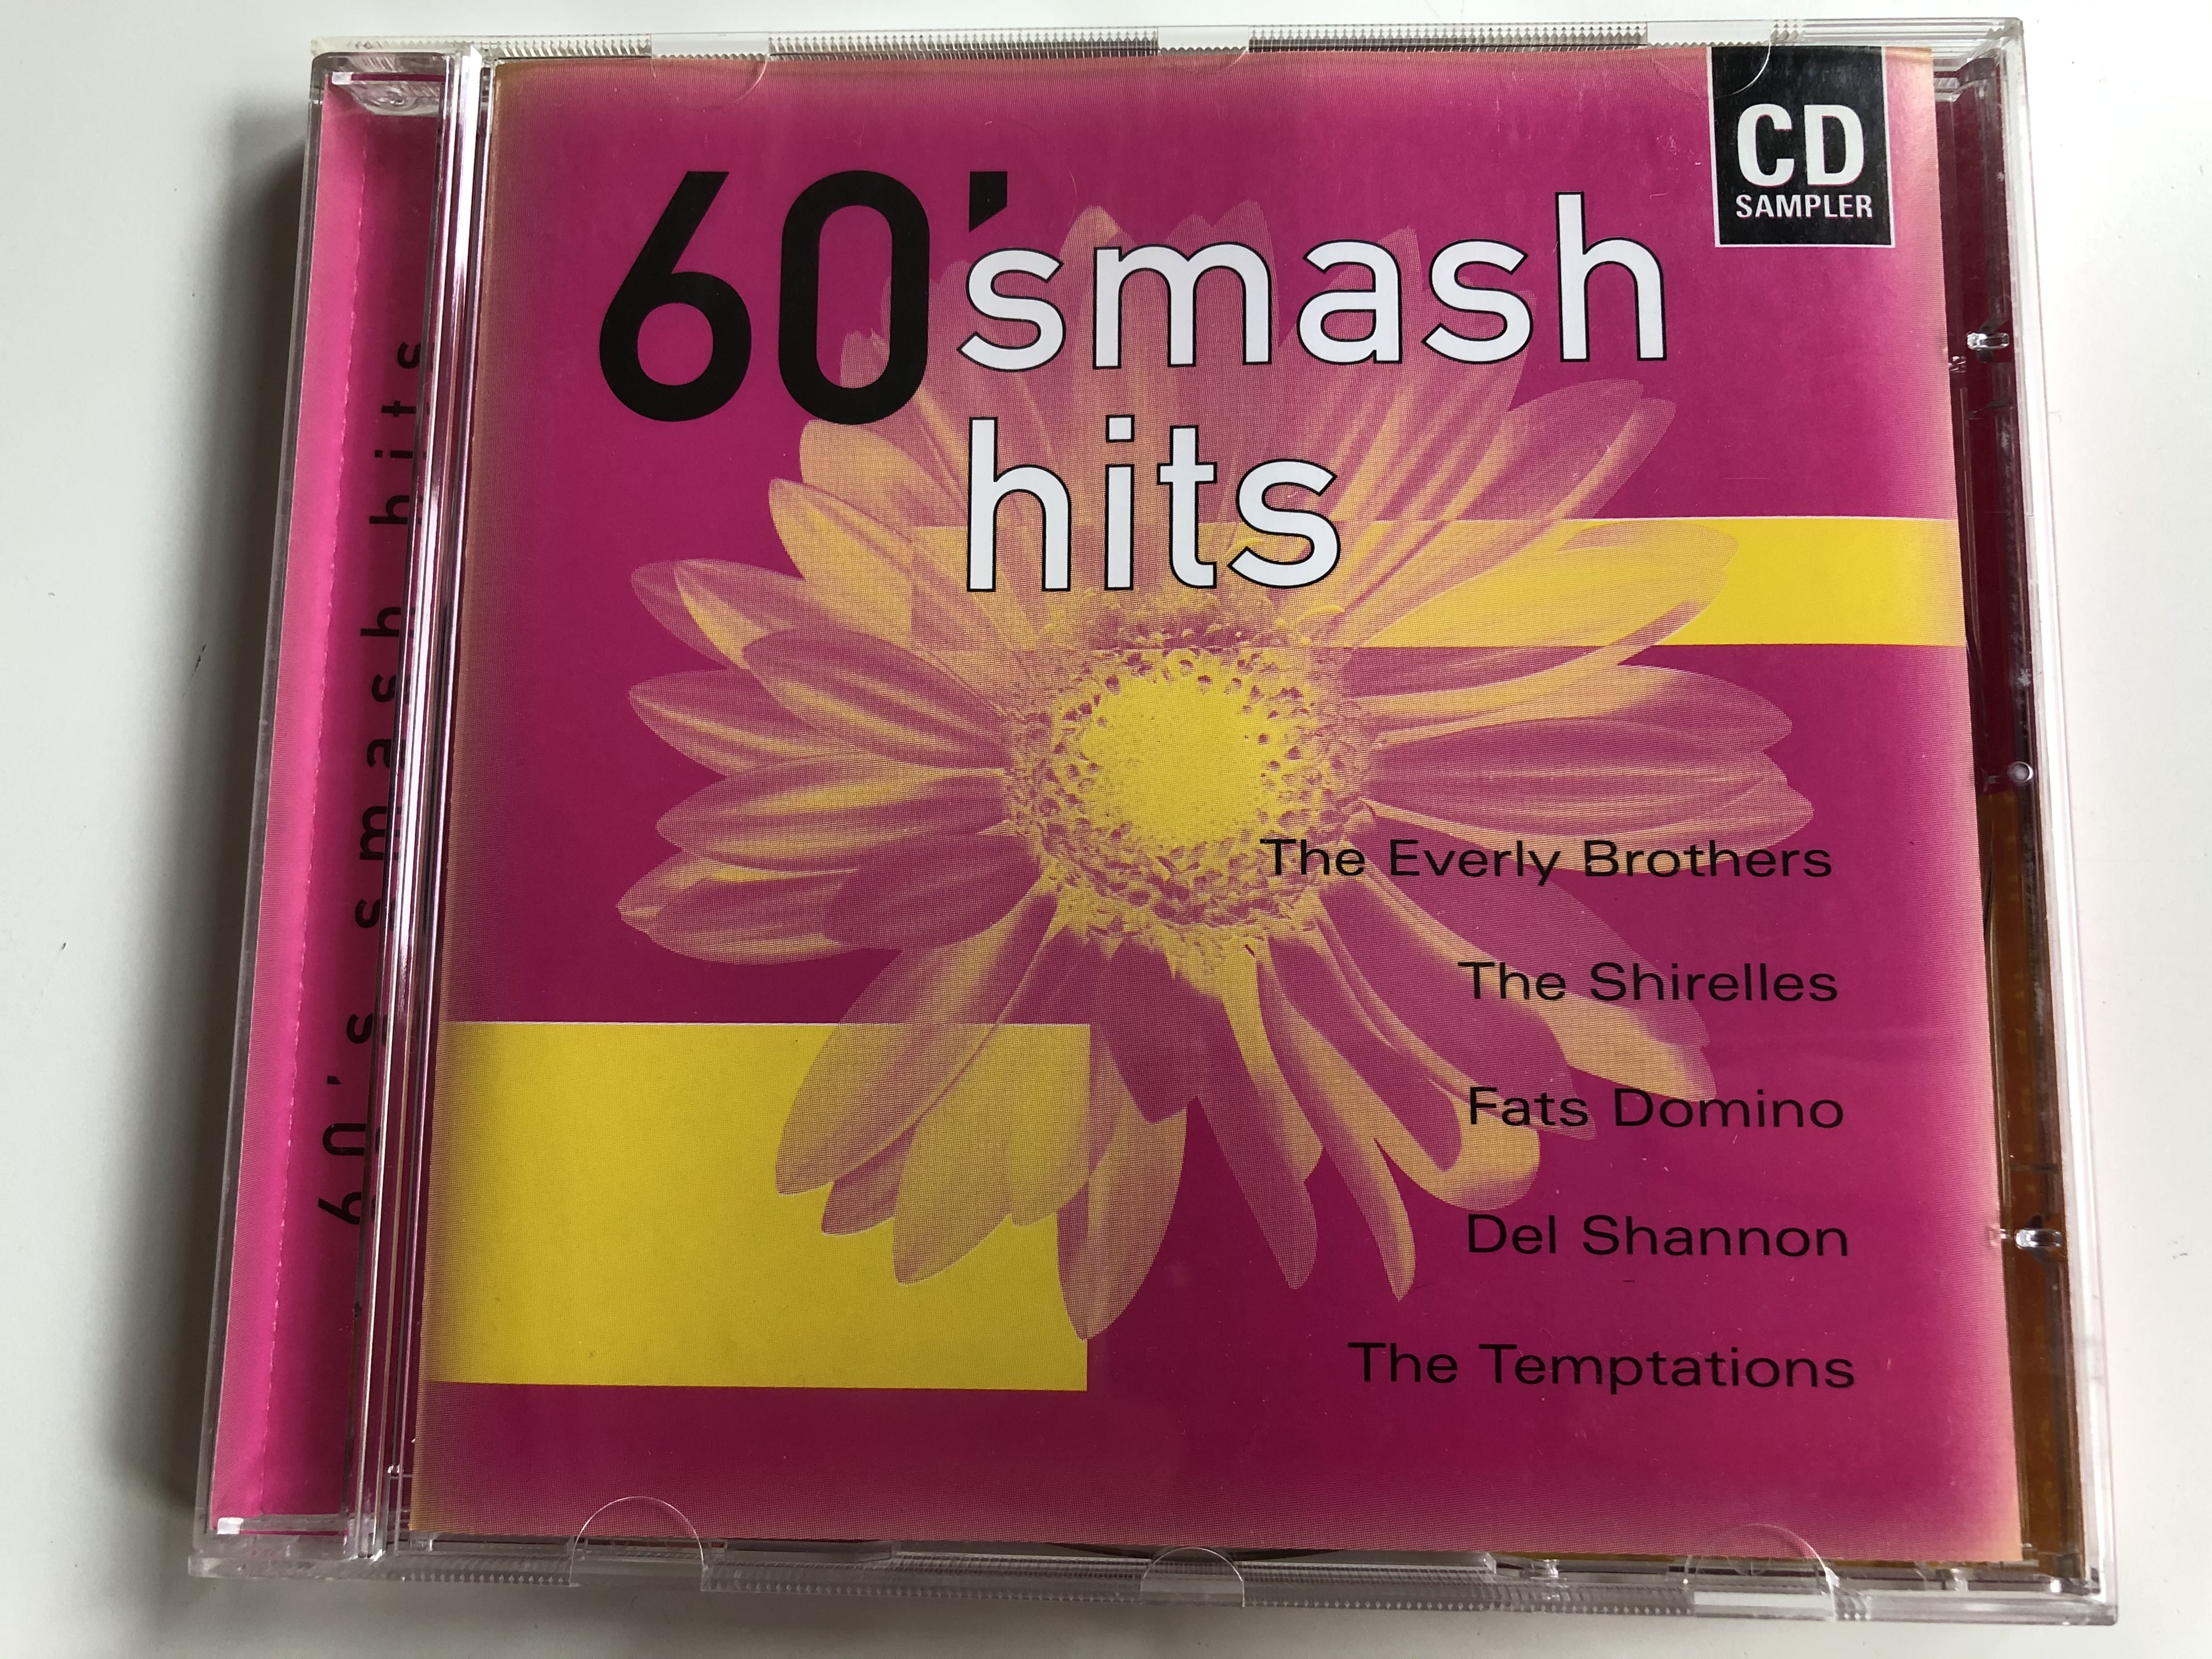 60-s-smash-hits-the-everly-brothers-the-shirelles-fats-domino-del-shannon-the-temptations-disky-audio-cd-1998-dc-888552-1-.jpg